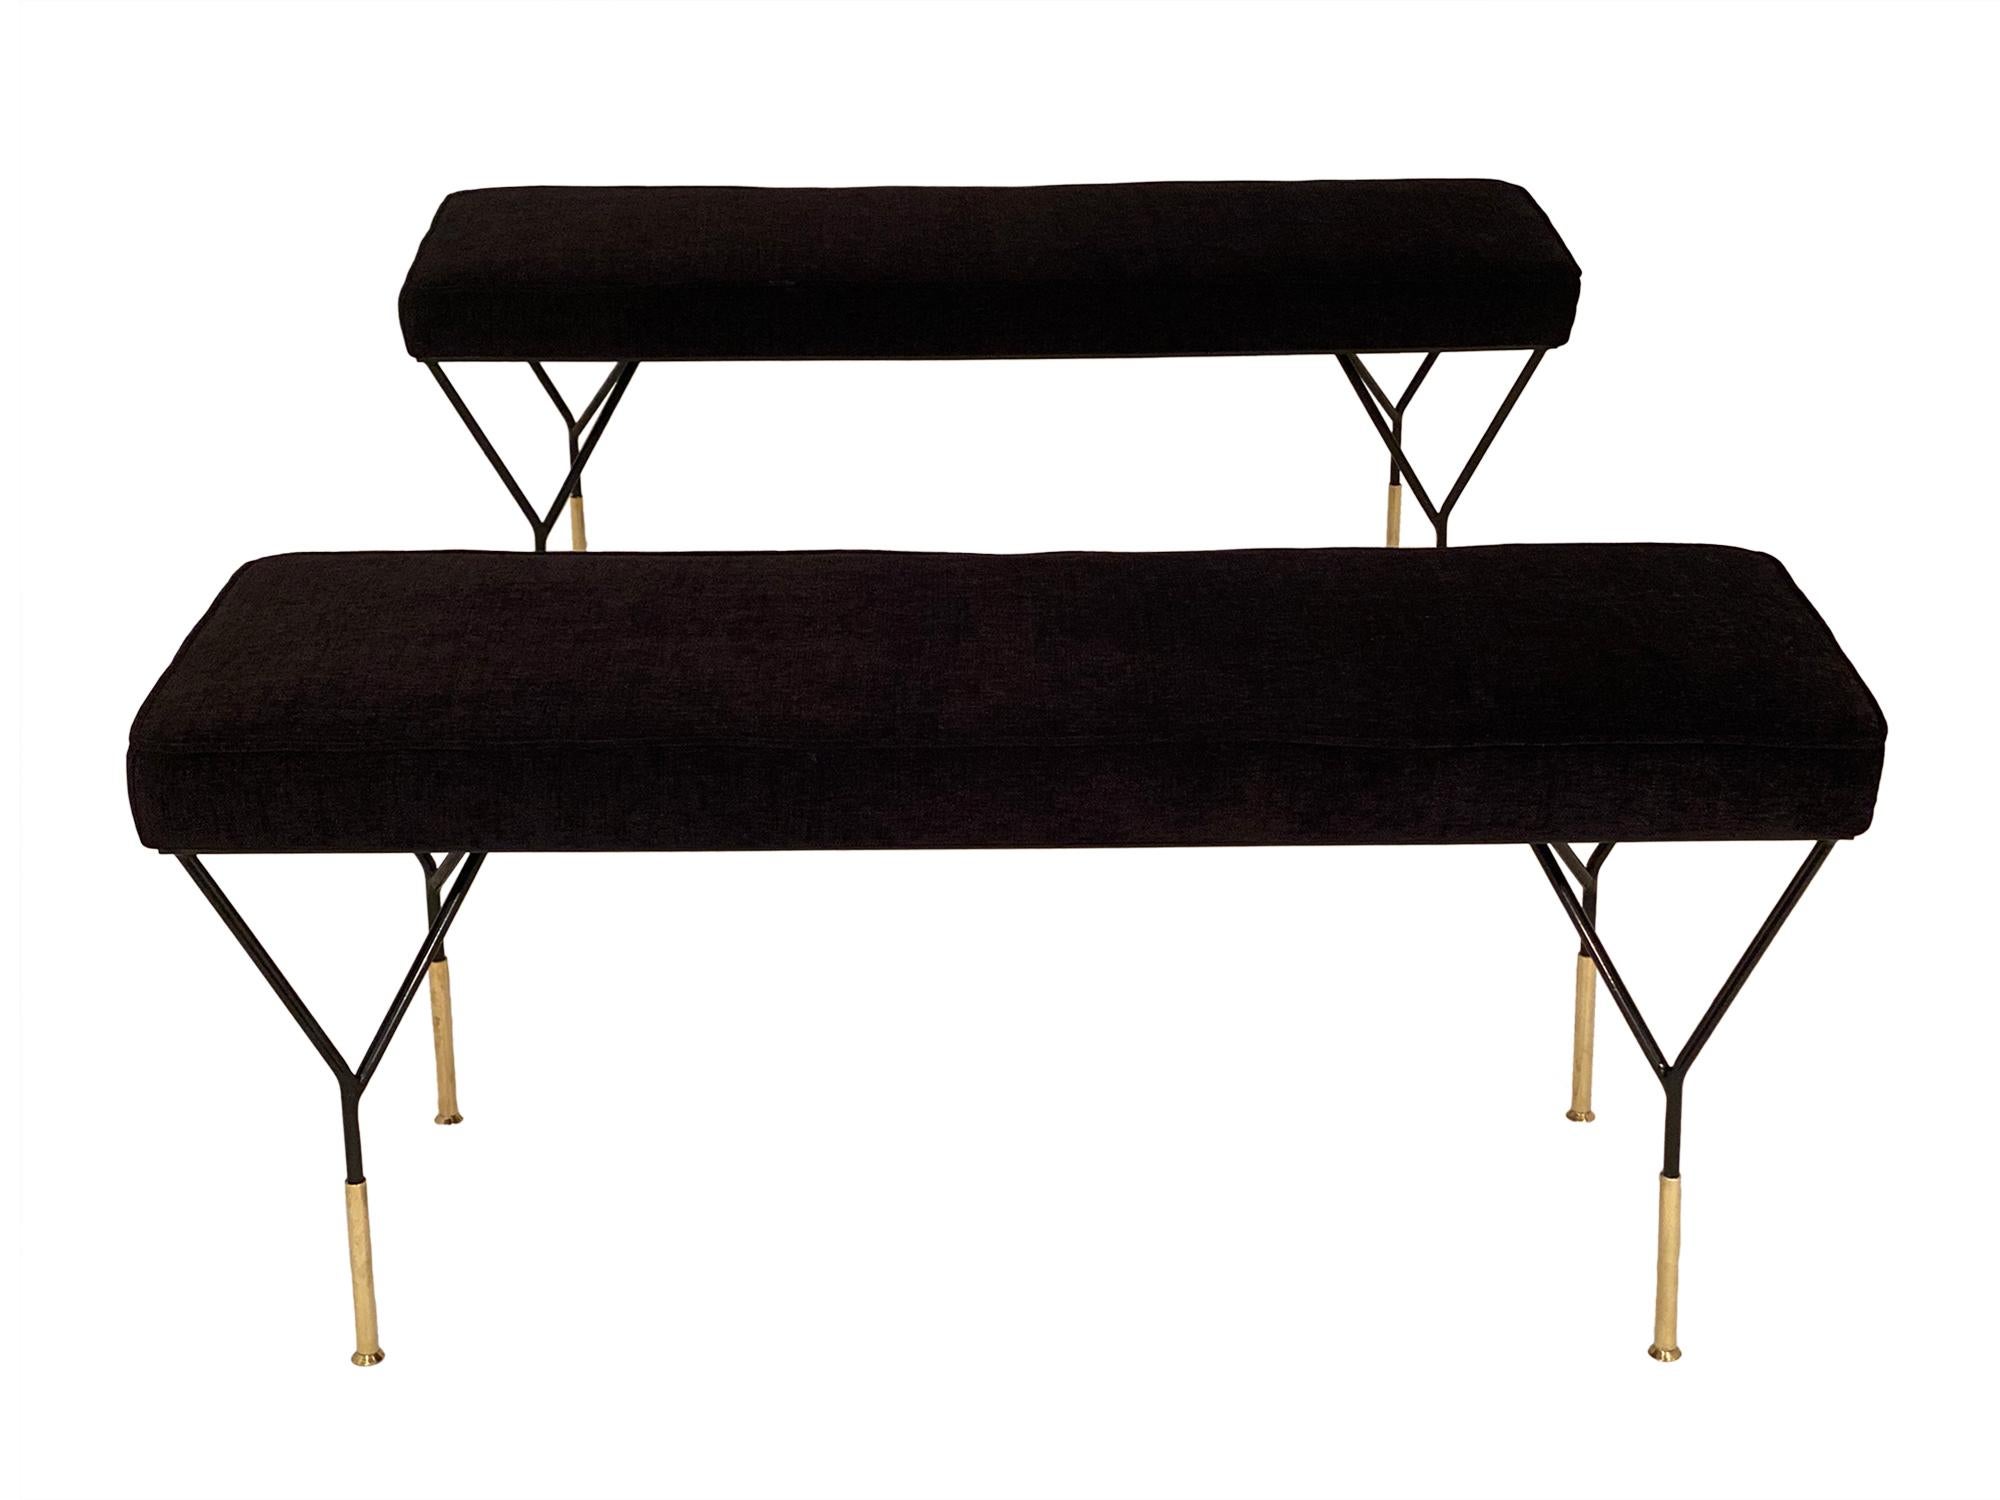 Pair of benches in the manner of Carlo di Carli. This Italian pair has black lacquered steel bases with solid gilt brass feet and a navy blue upholstery.